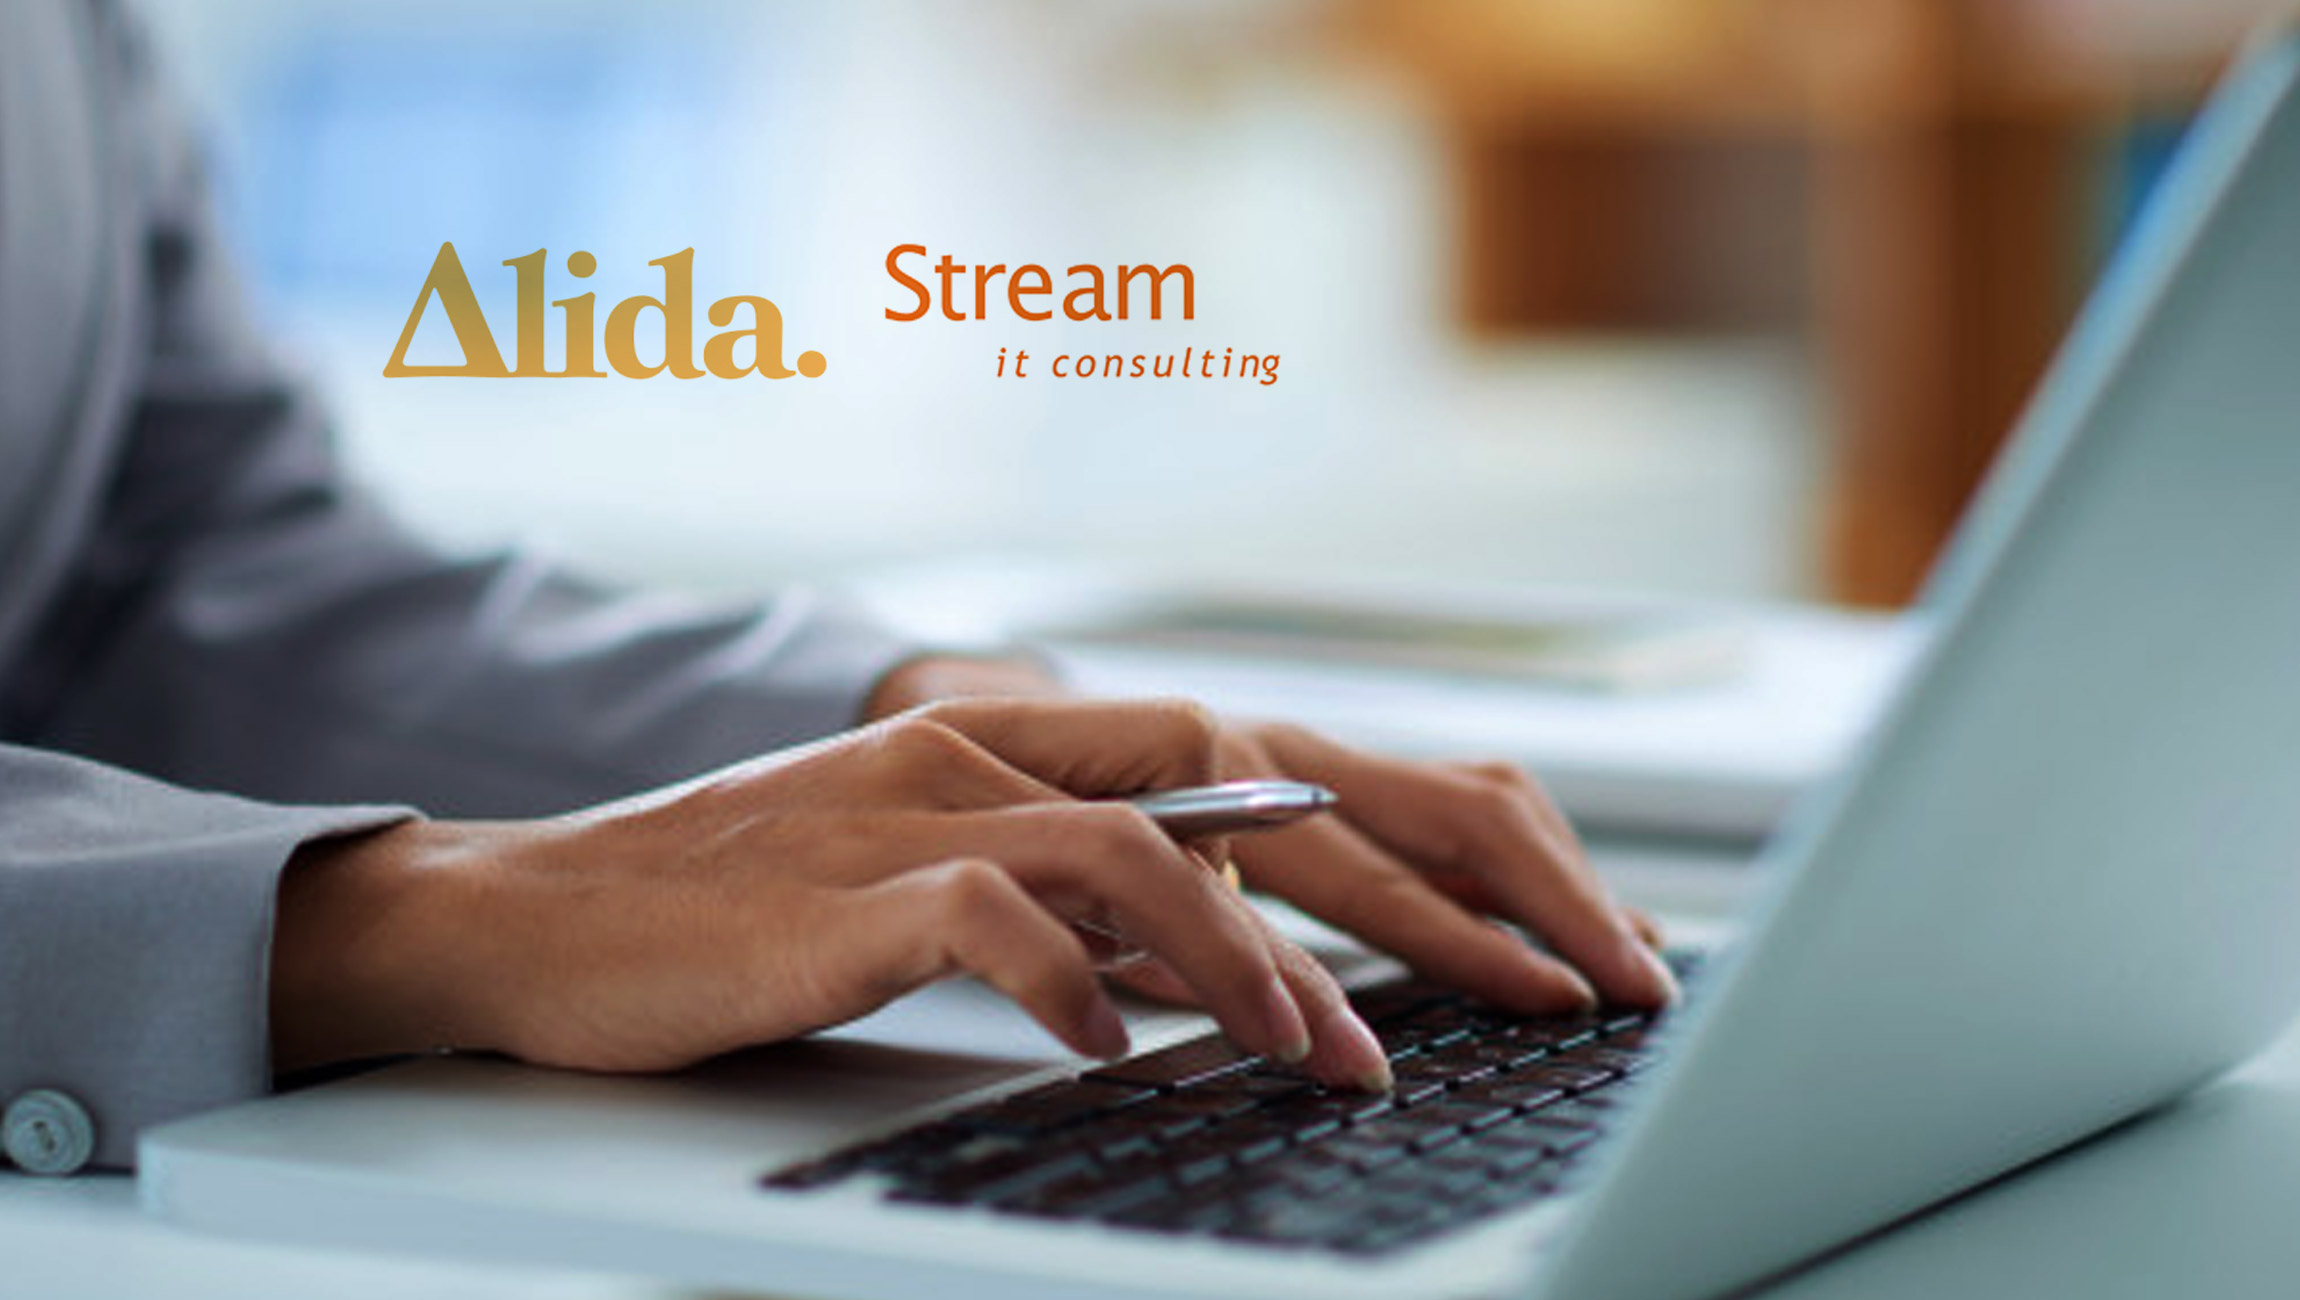 Stream I.T. Consulting Ltd. Joins the Alida Partner Network to Optimize Customer Experiences in Asia